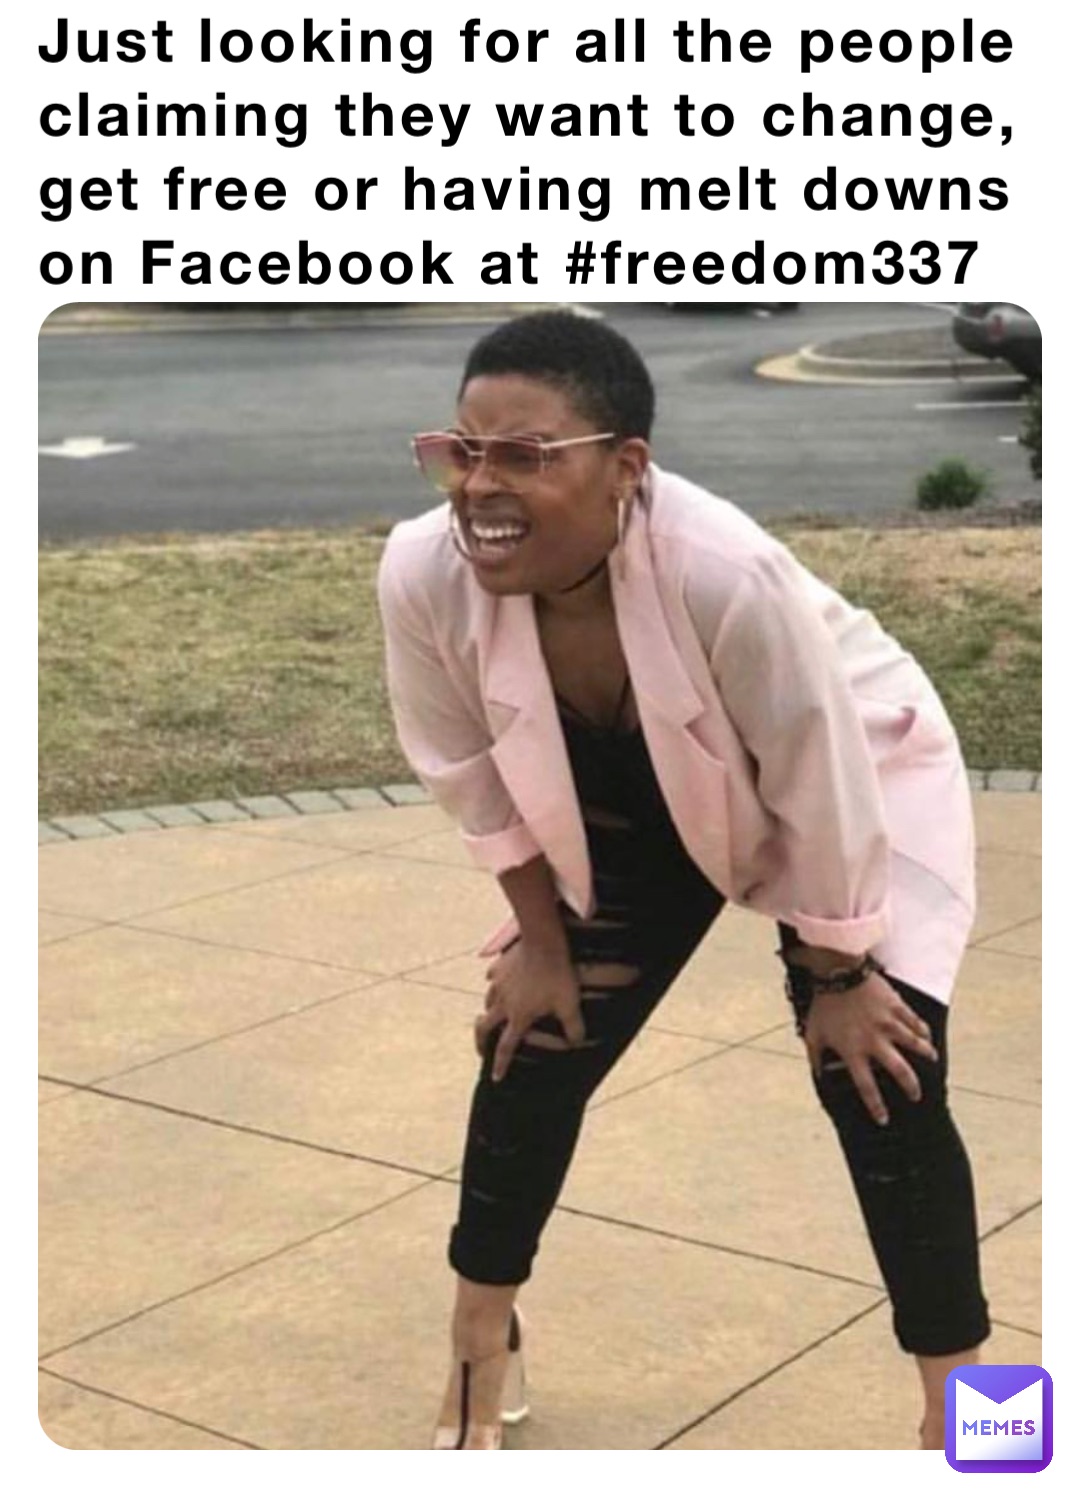 Just looking for all the people claiming they want to change, get free or having melt downs on Facebook at #freedom337